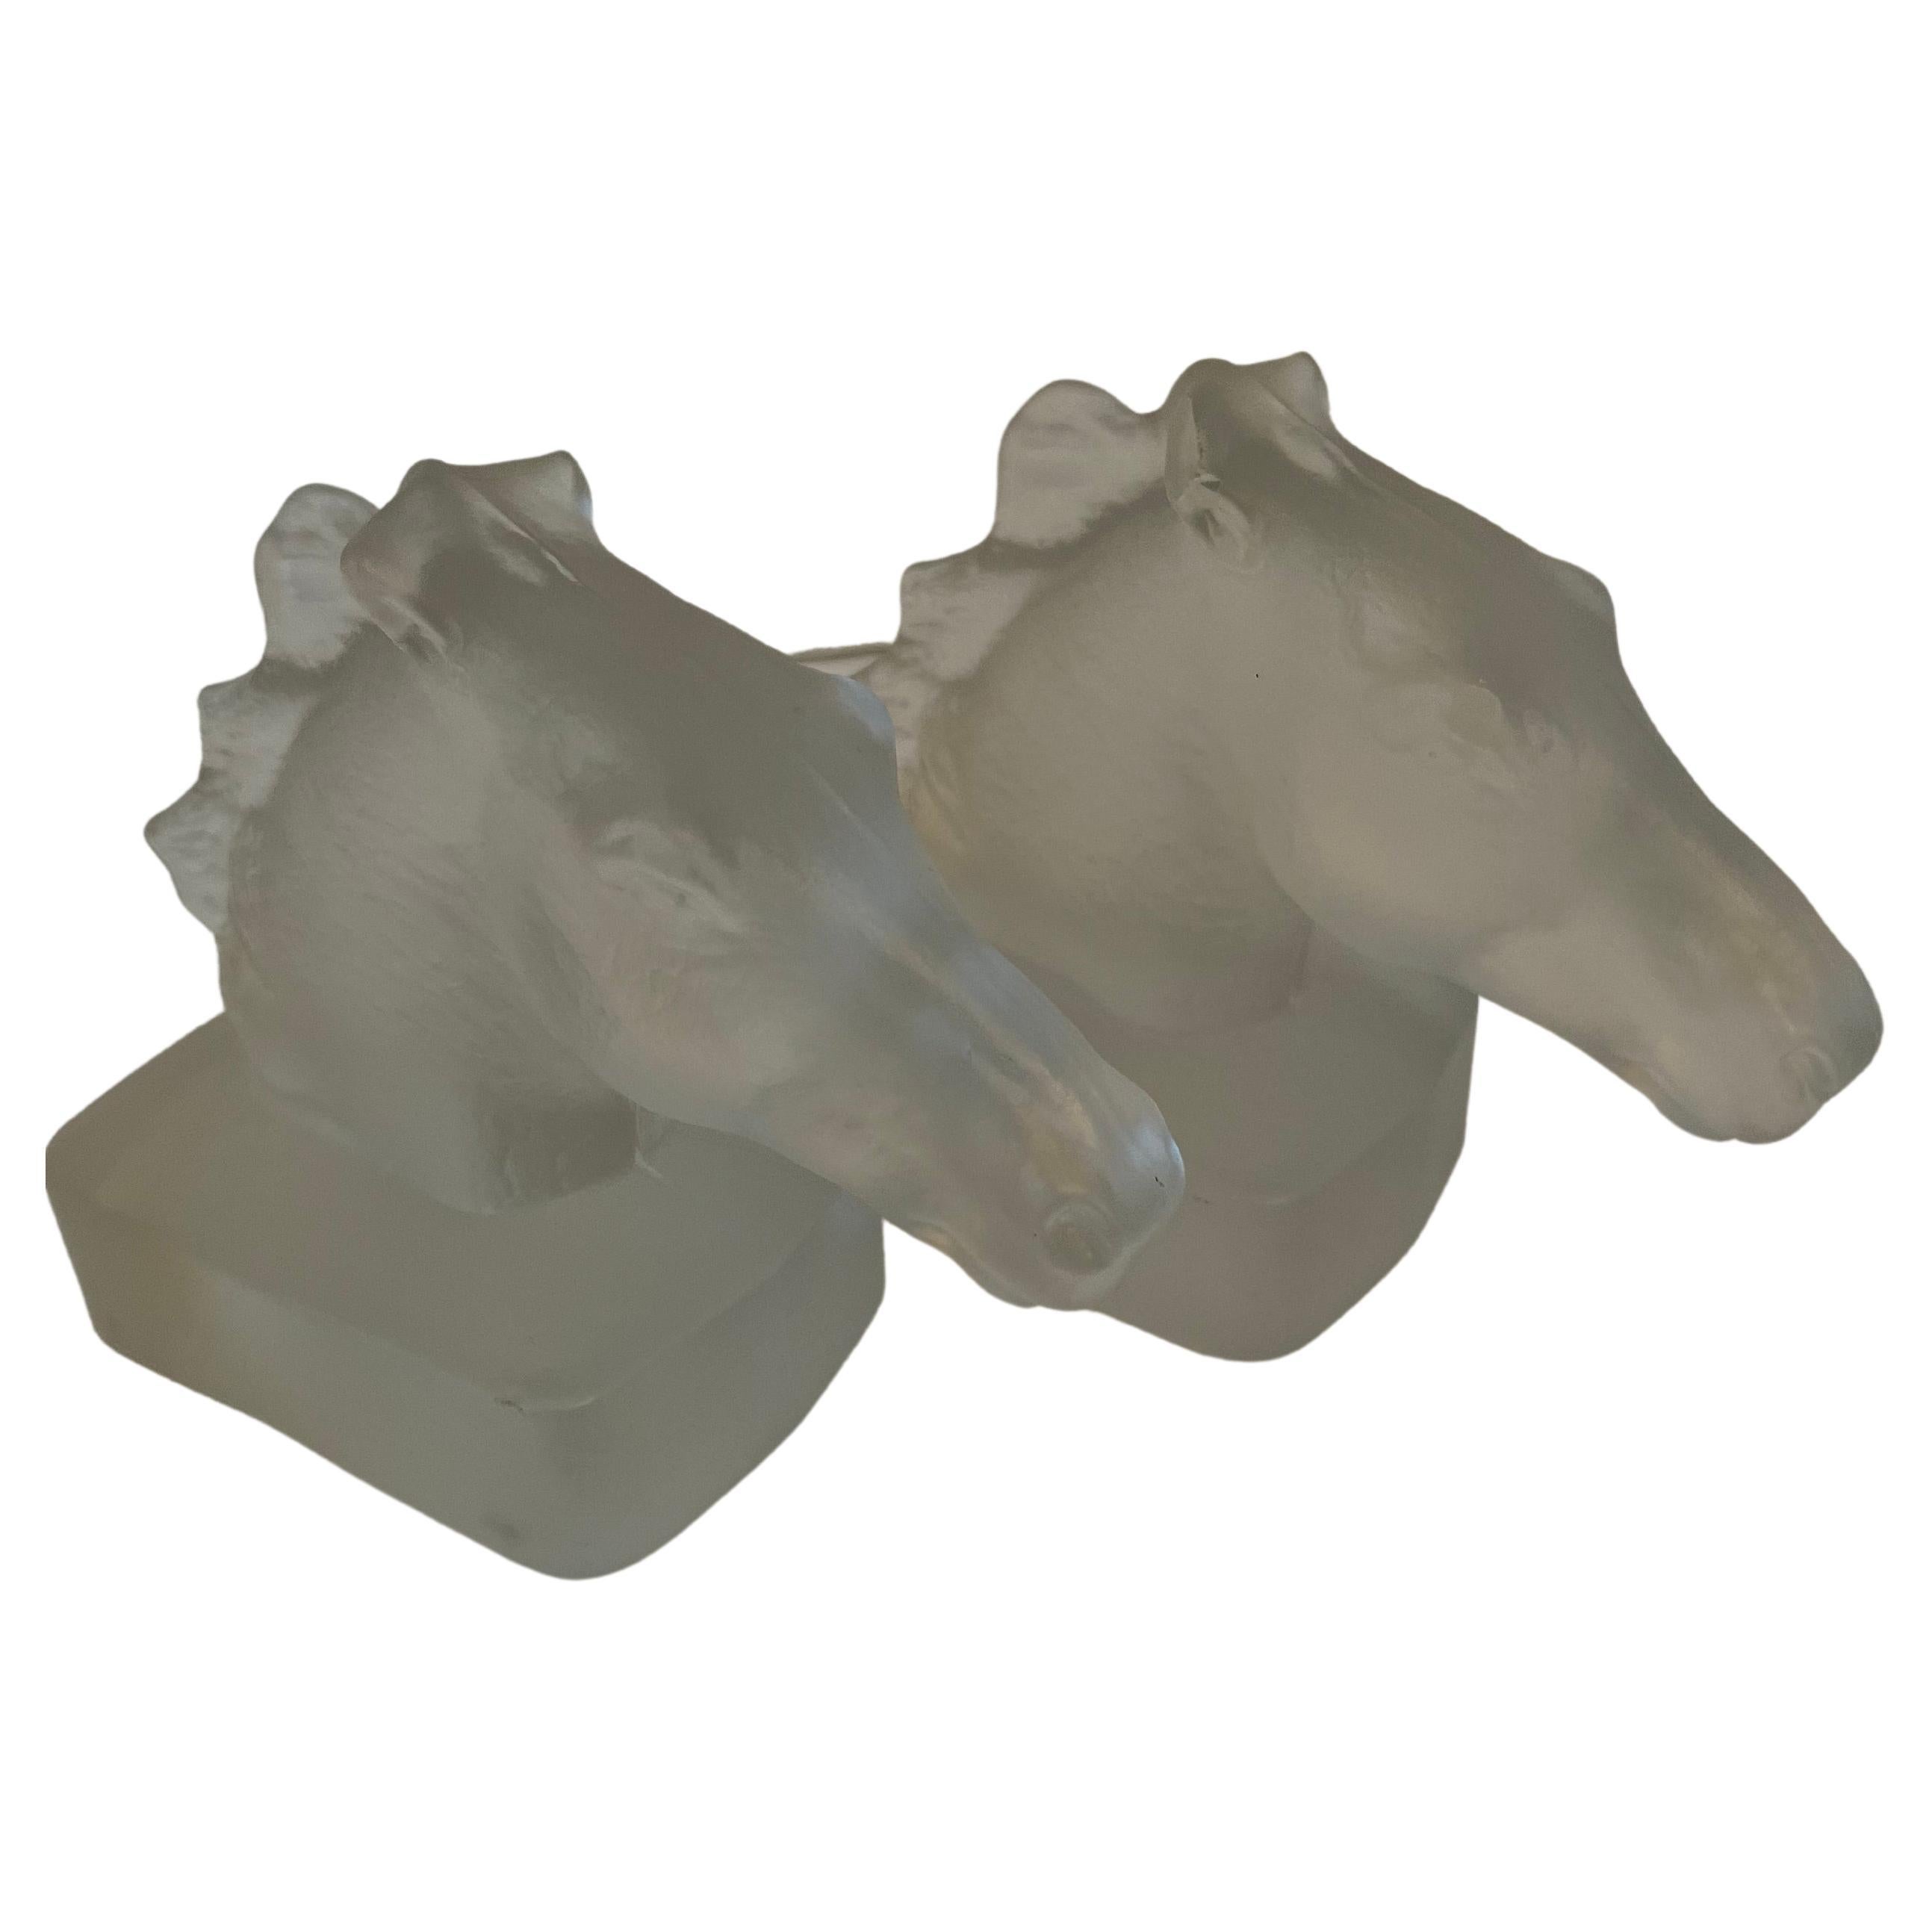 A wonderful pair of frosted Horse Head sculpture bookends. The pair could be used as decorative pieces but also are perfect for bookends, especially in a Childs room. They are molded glass but definitely have a look of Lalique.